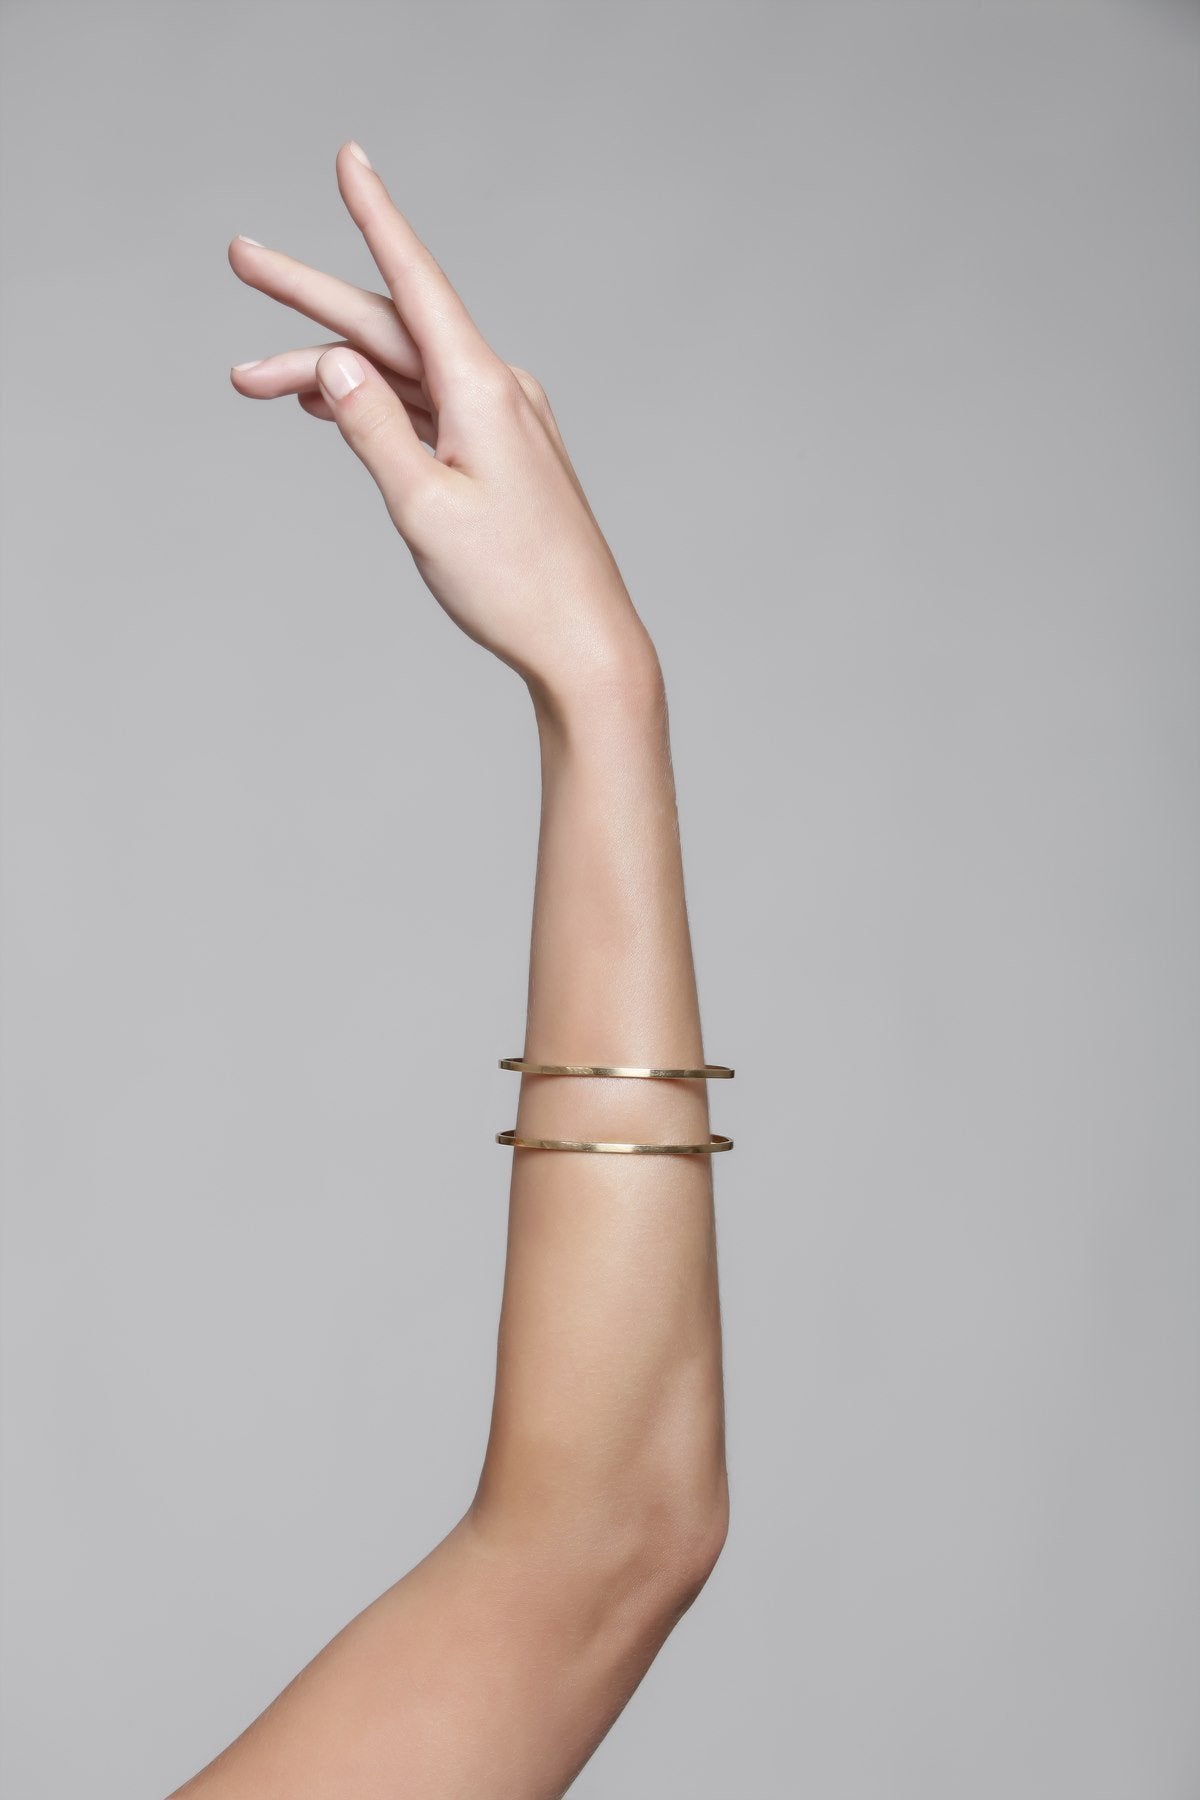 Camille Cuff - Boutique Minimaliste has waterproof, durable, elegant and vintage inspired jewelry